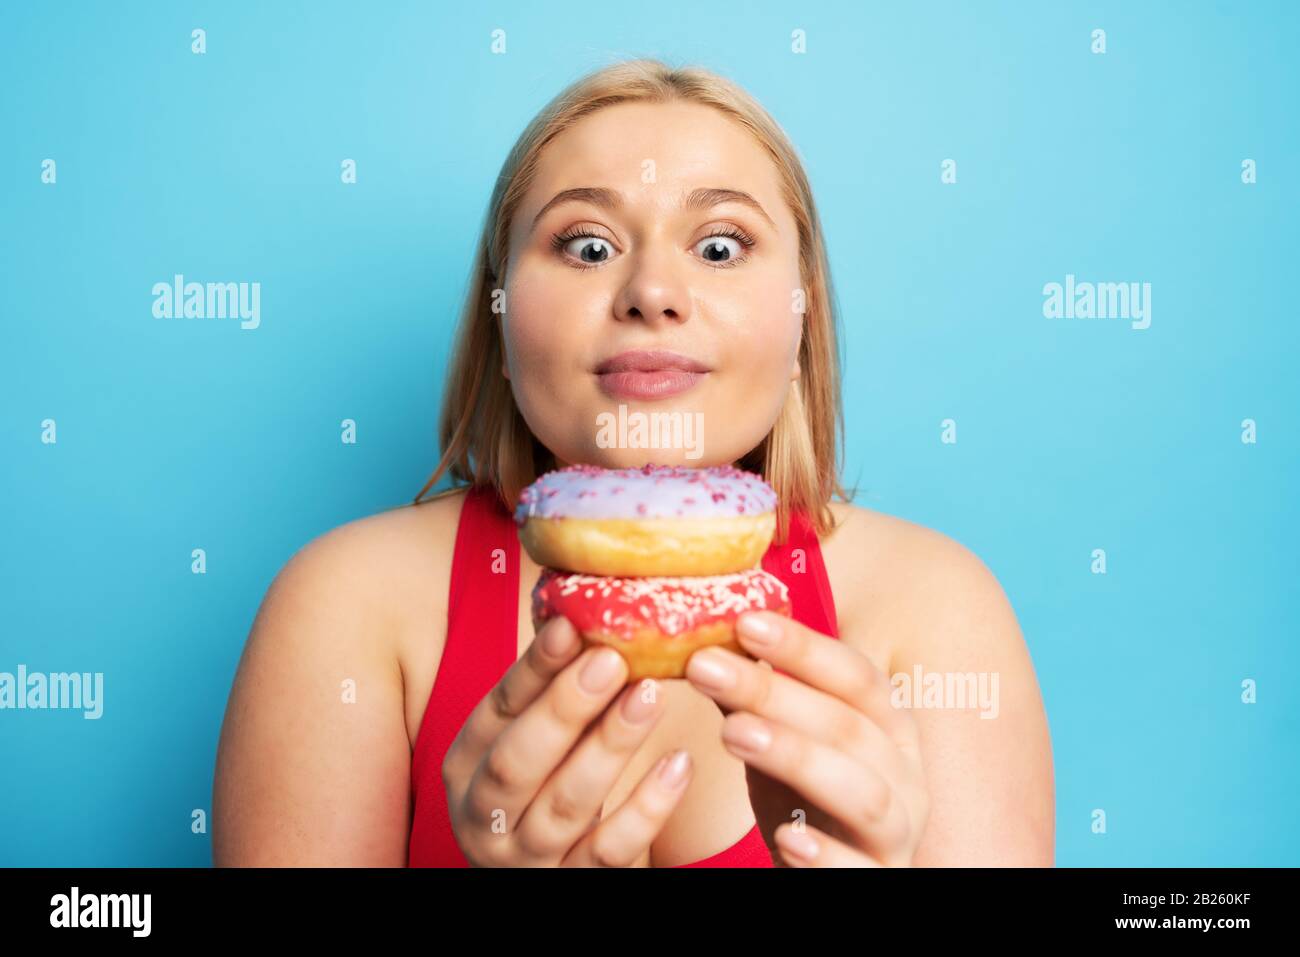 Fat girl thinks to eat donuts instead of does gym. Concept of indecision and doubt Stock Photo